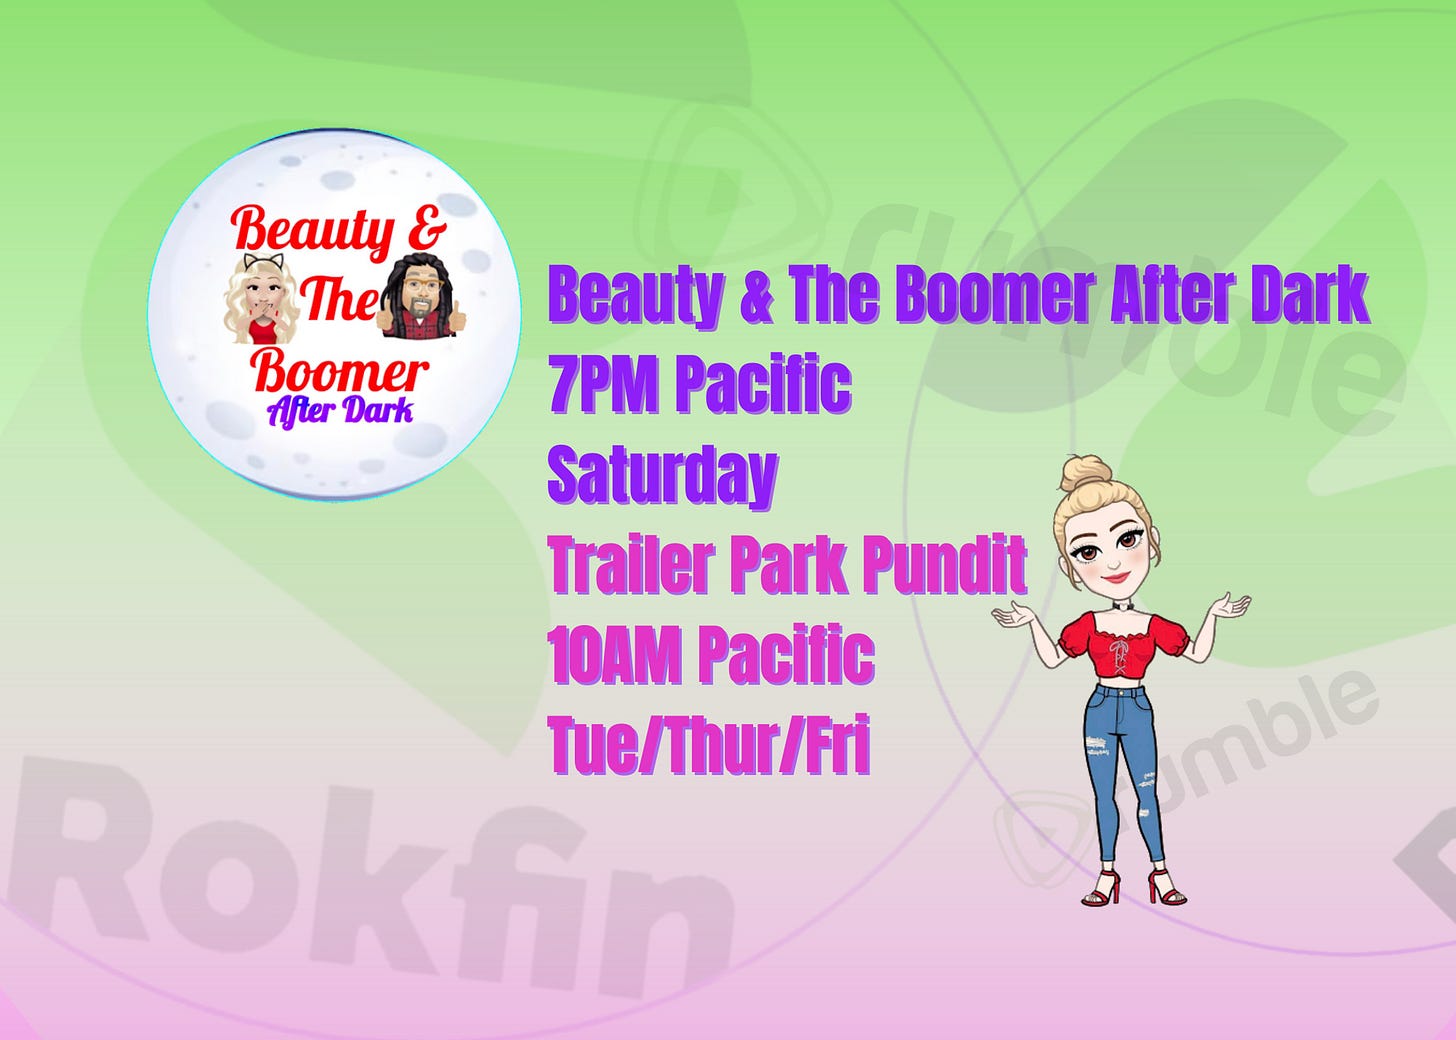 Beauty & The Boomer/Trailer Park Pundit Show Schedules